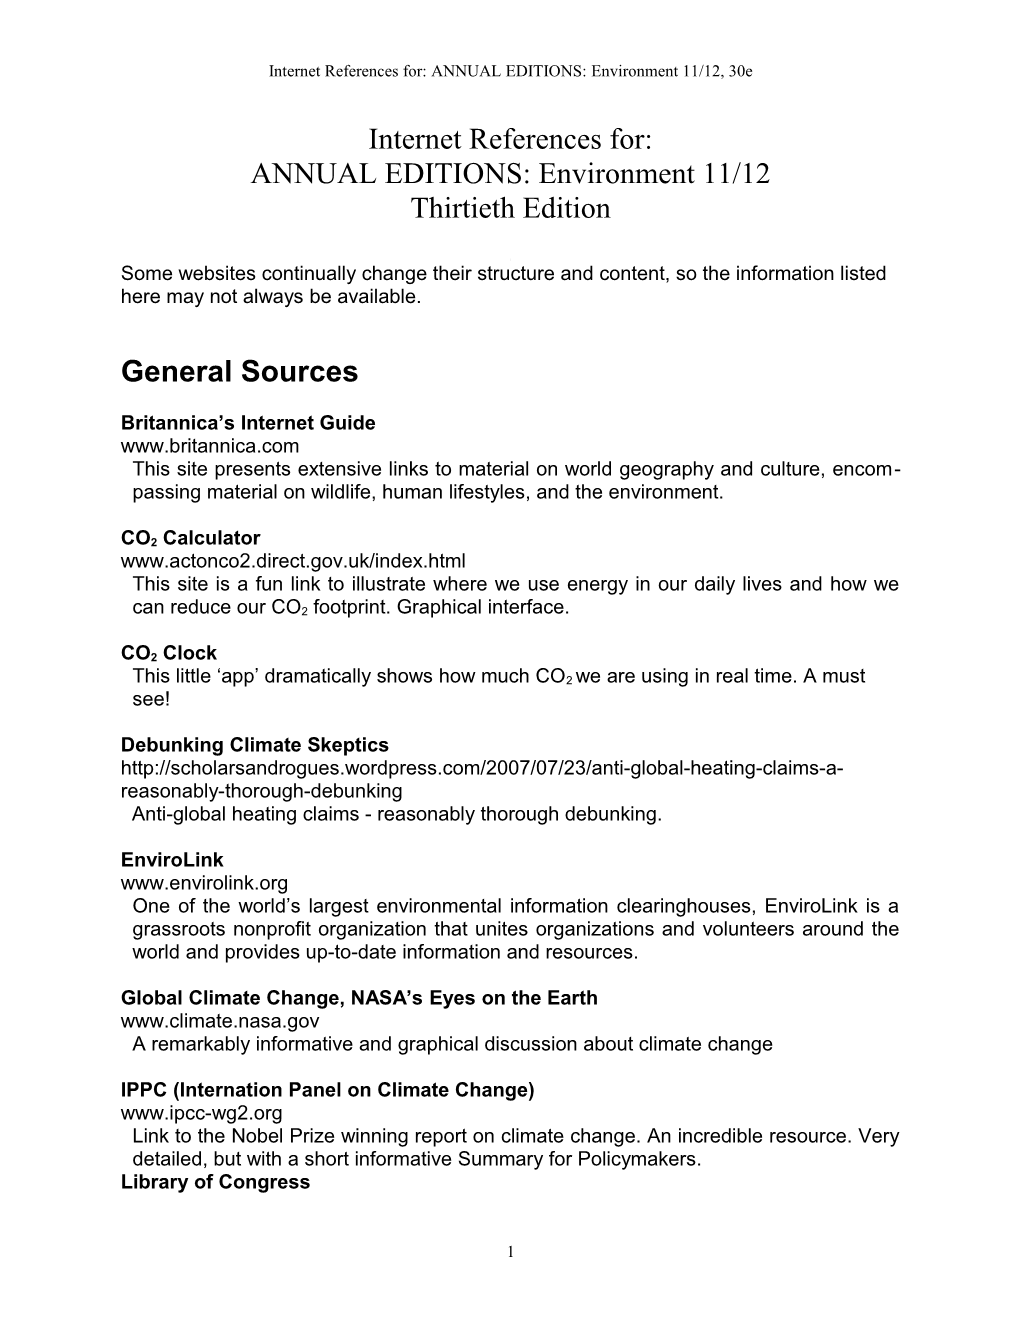 Internet References For: ANNUAL EDITIONS: Environment 11/12, 30E